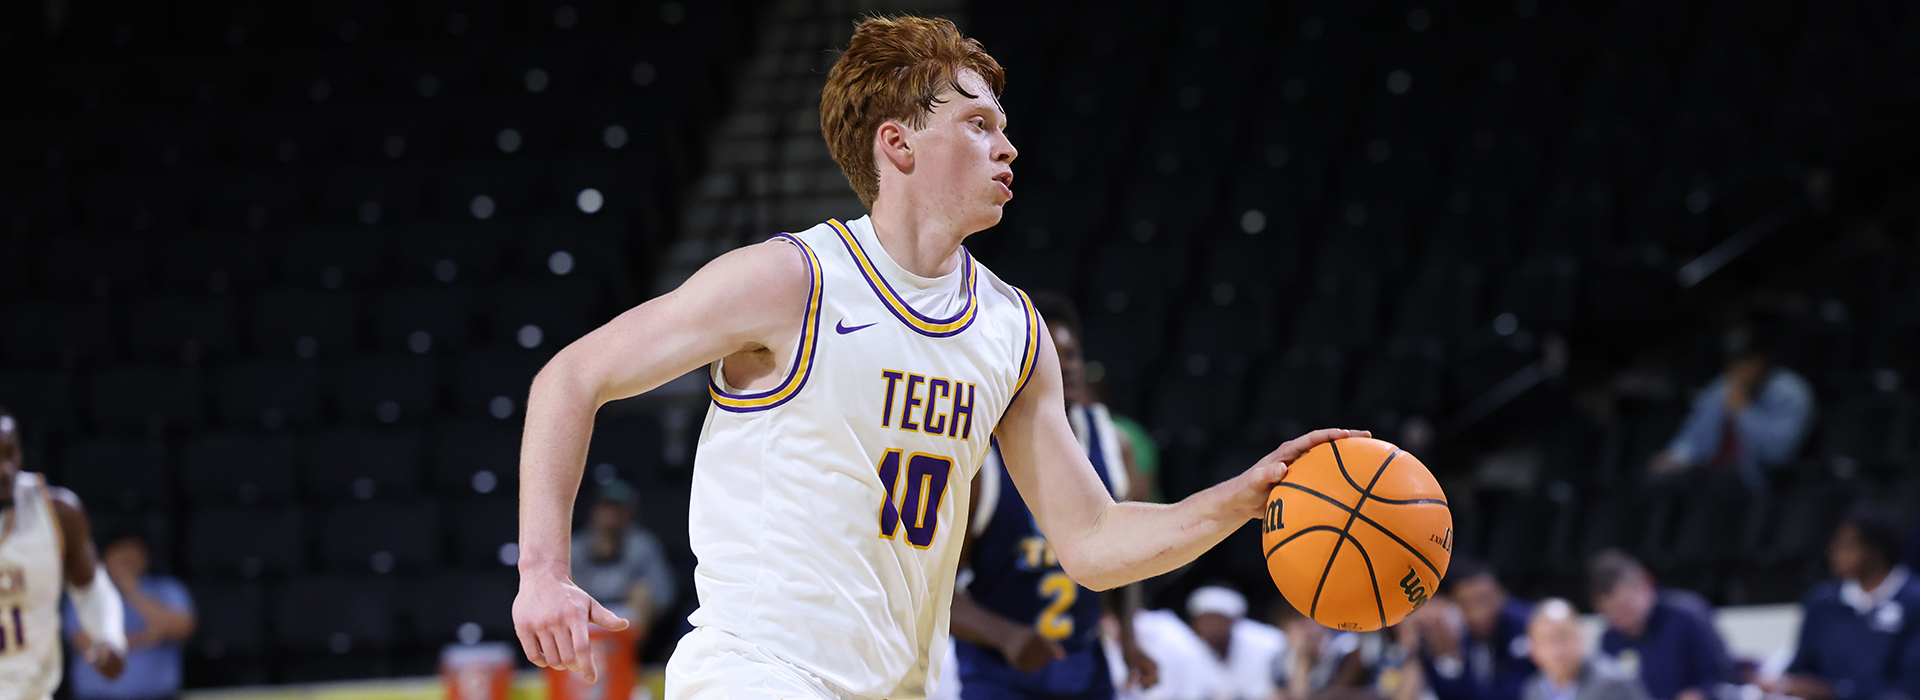 Tech returns to action with trip to Northern Kentucky Sunday afternoon